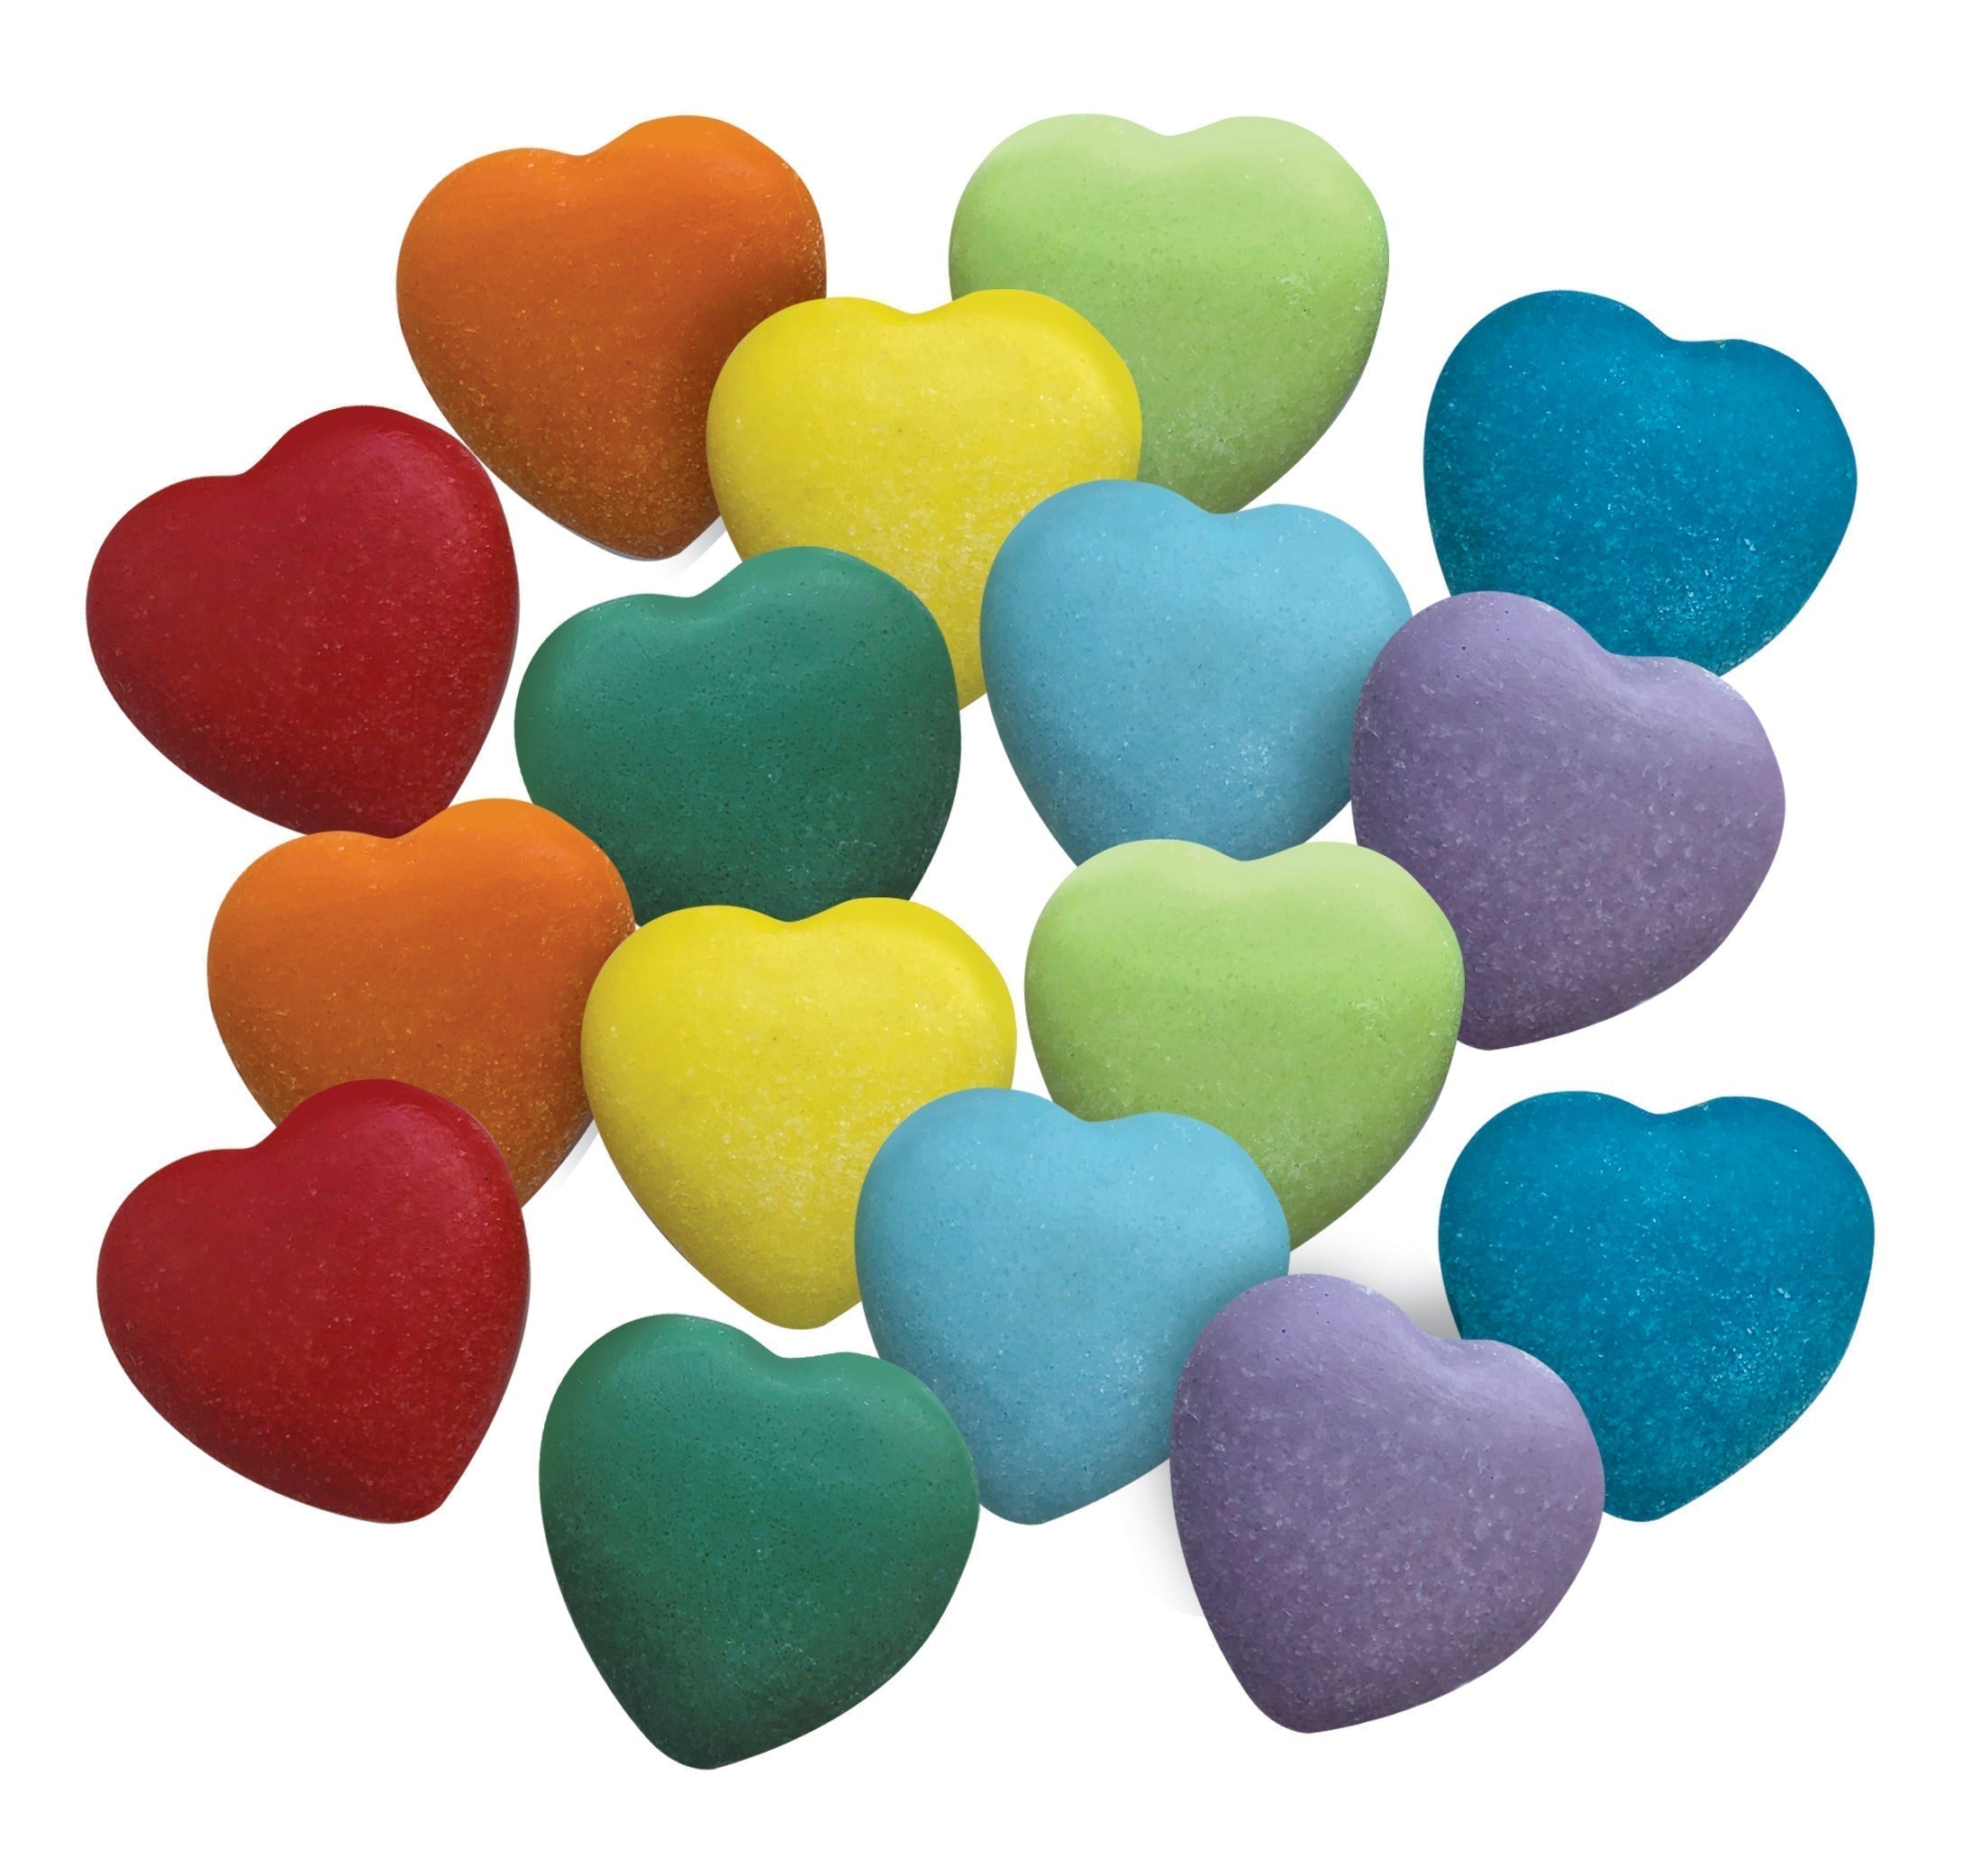 Kindness Hearts, Children will love to touch, hold and give away these attractive, tactile kindness heart stones. The Kindness Hearts are made in eight colourful shades, they will help children recognise and appreciate kindness, and then show this to each other. The Kindness Heart Stones are a perfect way of saying thank you for acts of kindness, or simply to hold to express gratitude and discuss the thoughts, actions and words that make a positive difference. A valuable and nurturing resource to support ch